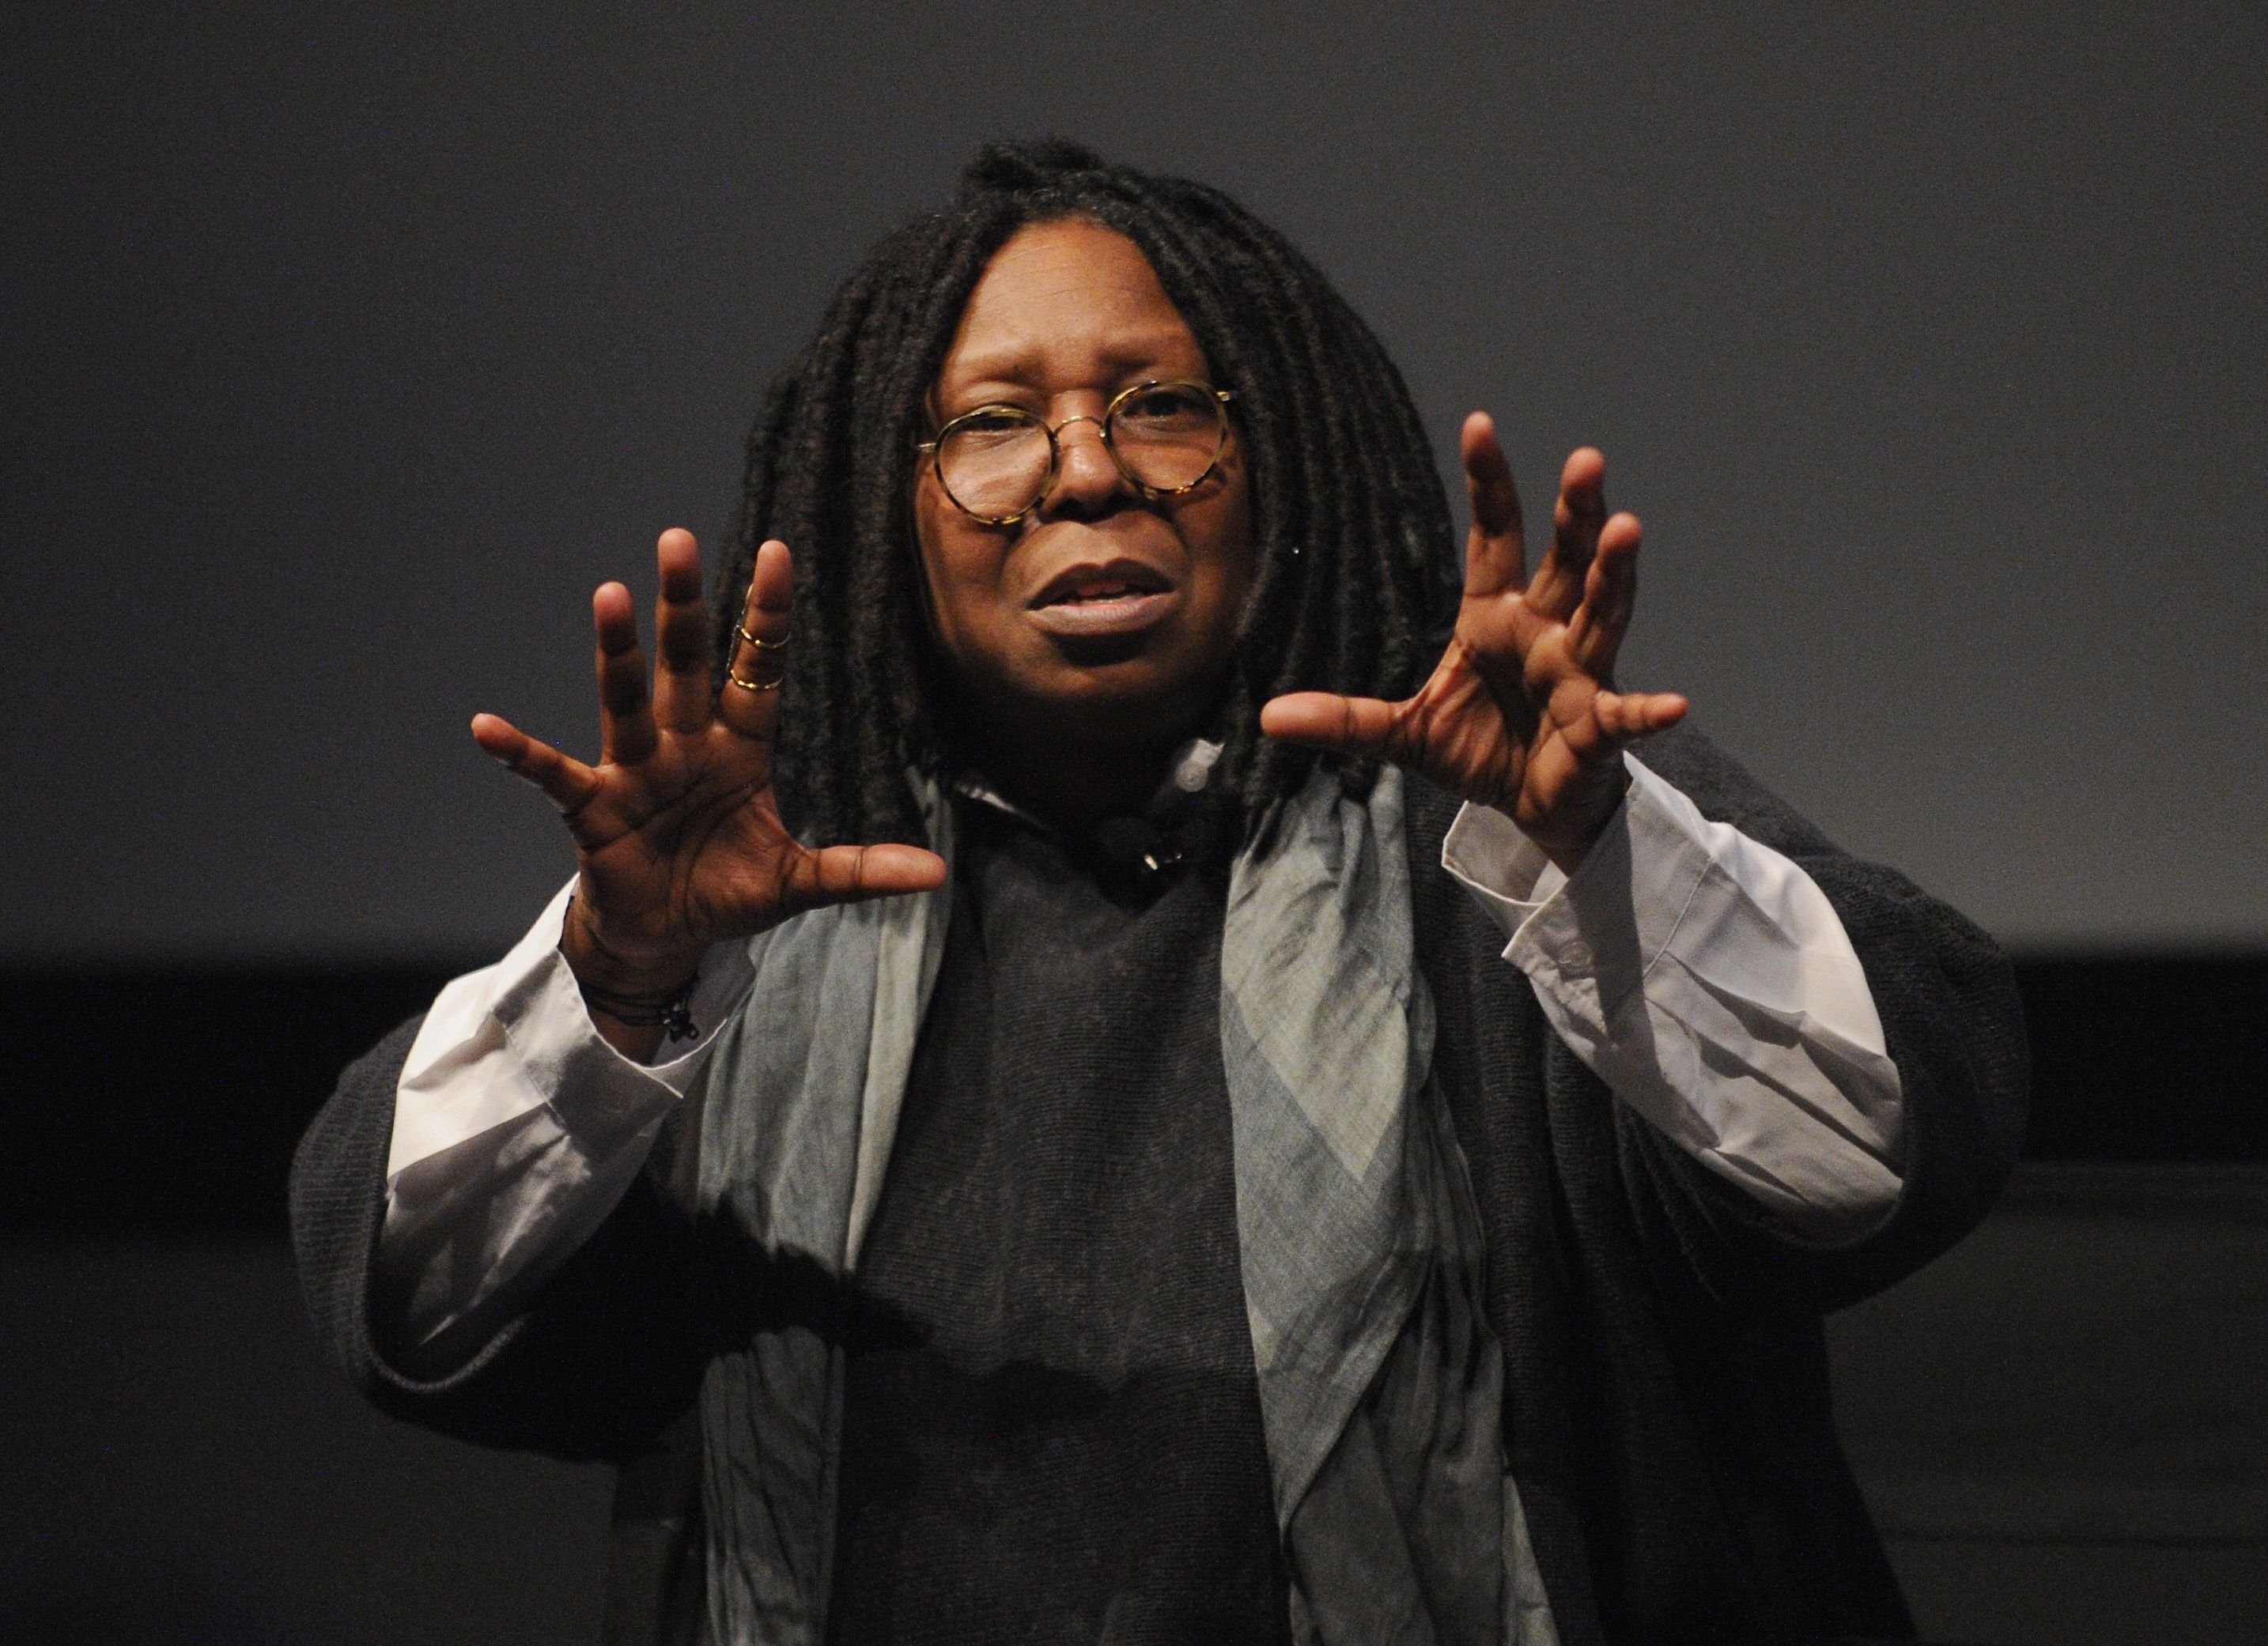 Whoopi Goldberg at the "I Got Somethin' To Tell You" screening and Q+A at SVA Theatre 1 on April 22, 2013 | Photo: Getty Images